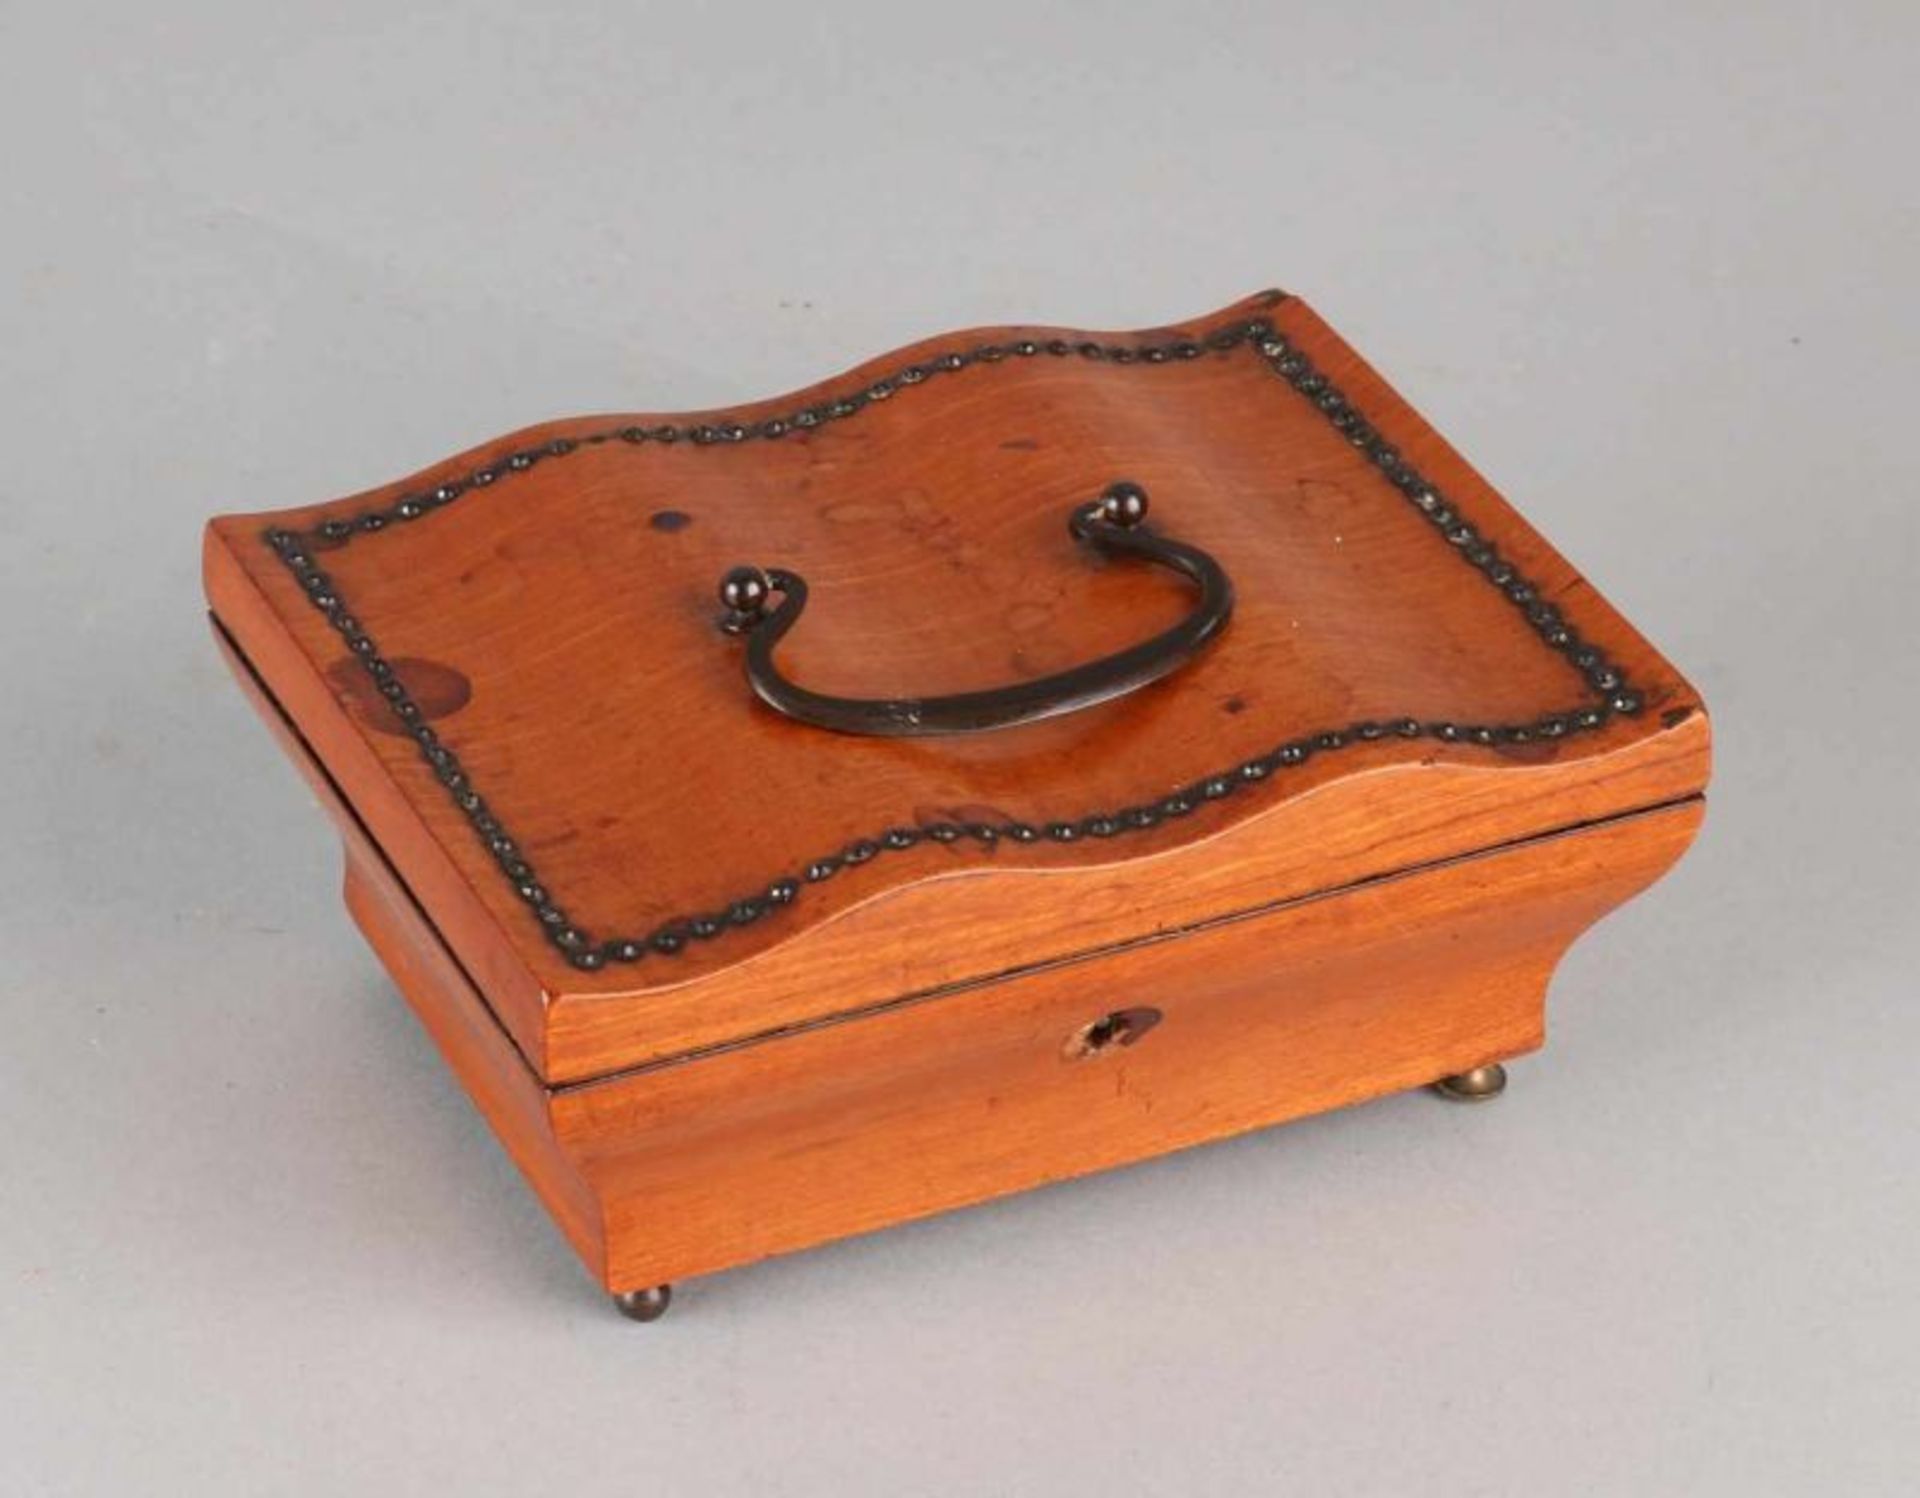 19th Century mahogany wooden box with a curved handle. One leg loose it. Not original. Size: 6.5 x